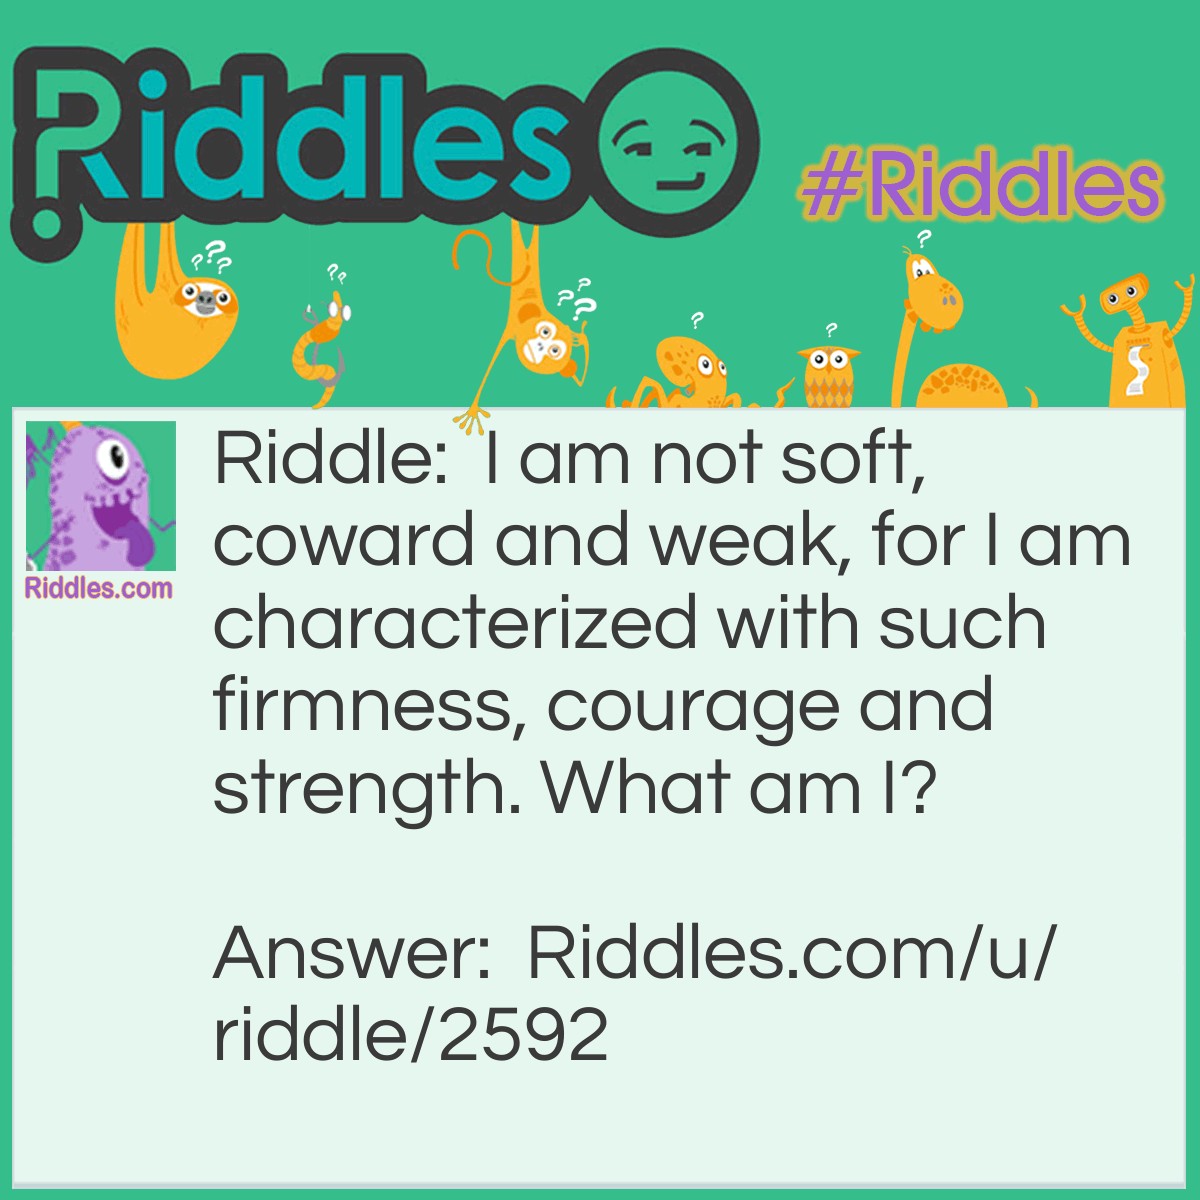 Riddle: I am not soft, coward and weak, for I am characterized with such firmness, courage and strength. What am I? Answer: Backbone.